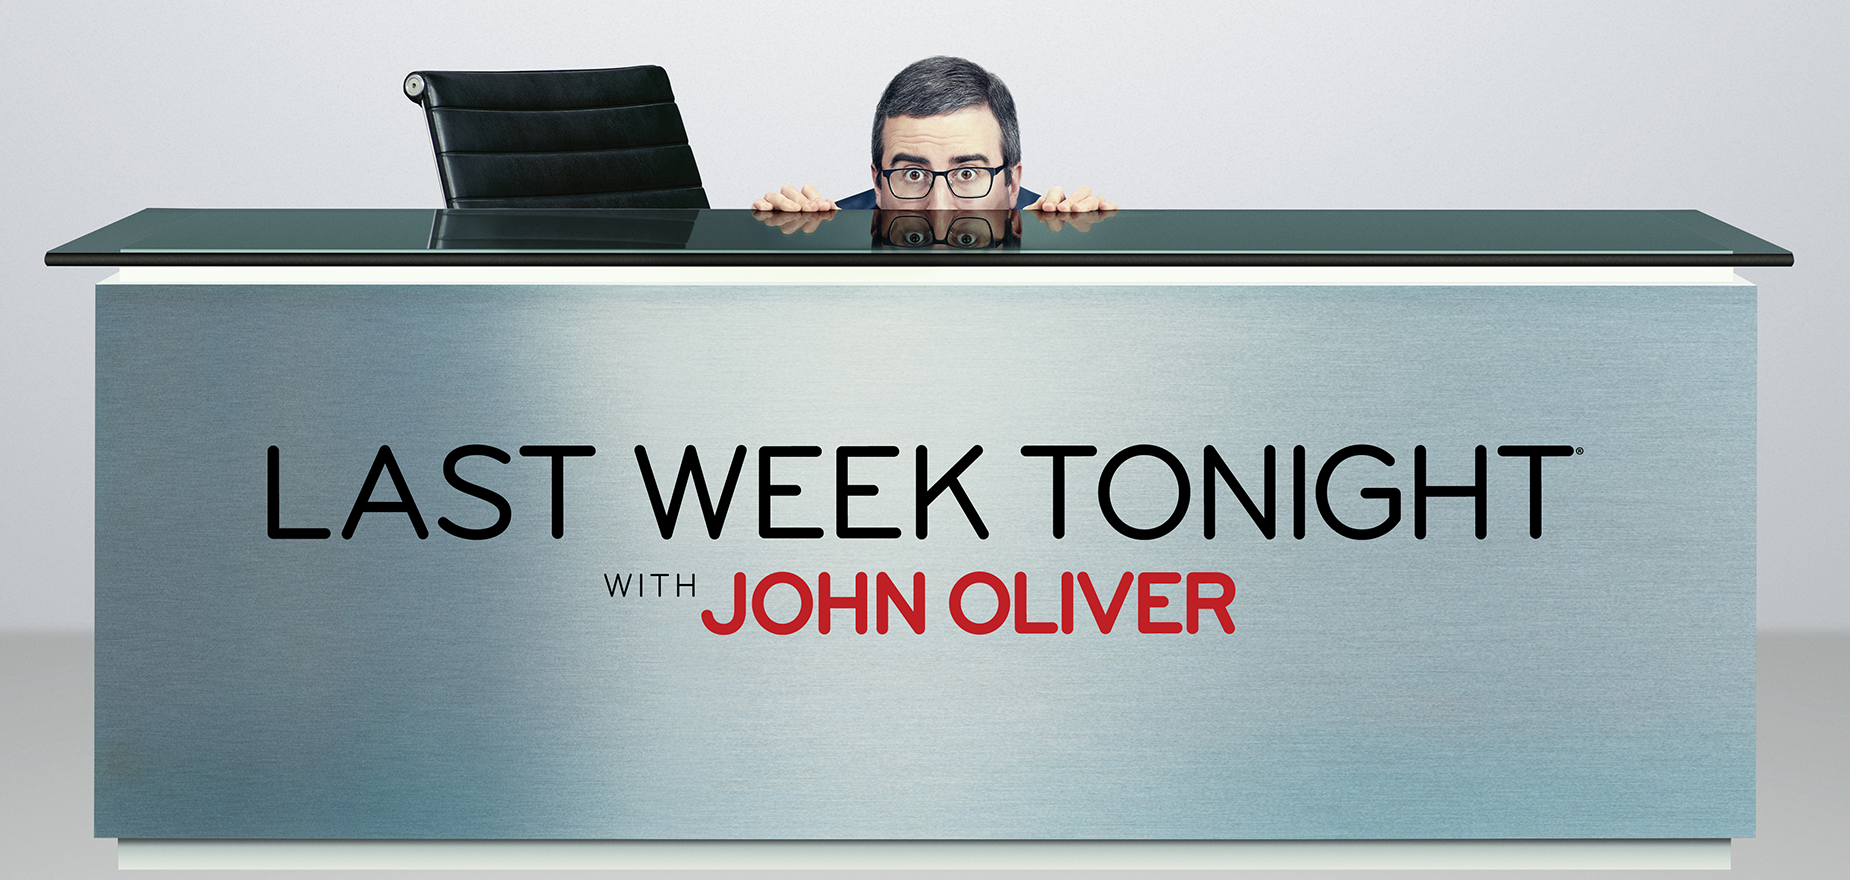 Last Week Tonight with John Oliver - HBO Entertainment in association with Sixteen String Jack Productions and Avalon Television